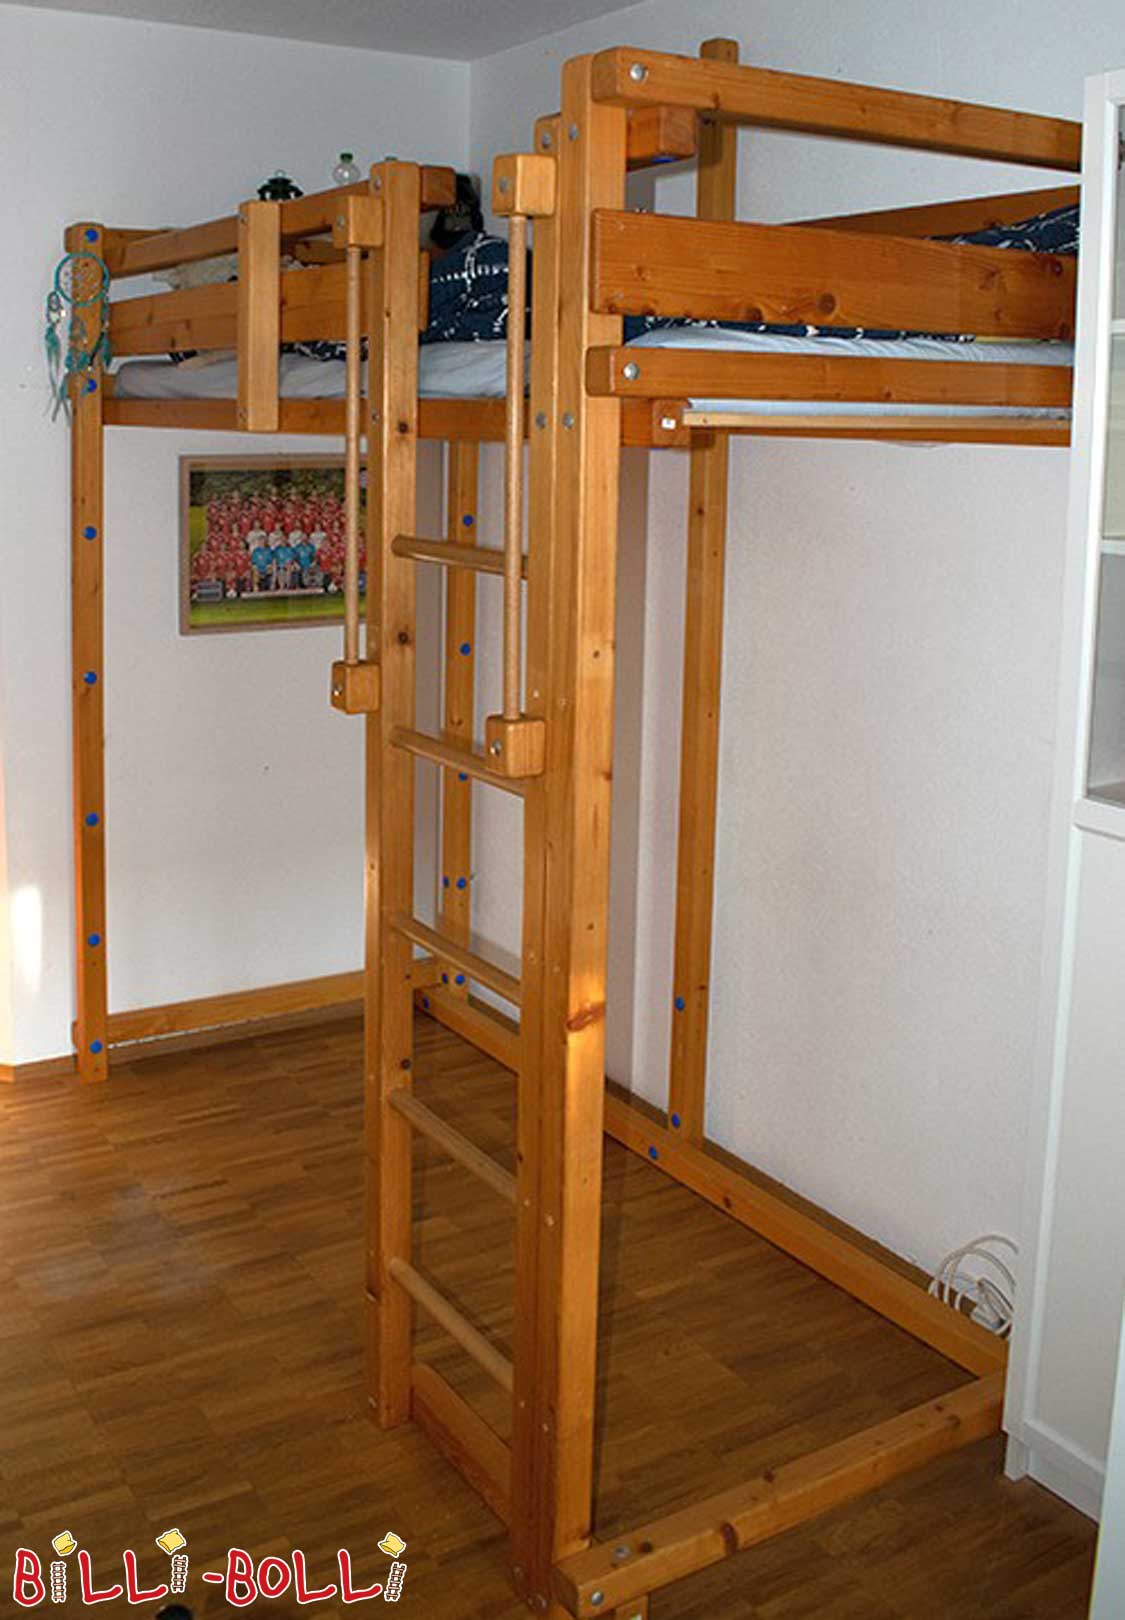 Growing loft bed, 90 x 200 cm, oiled-waxed spruce (Category: second hand loft bed)